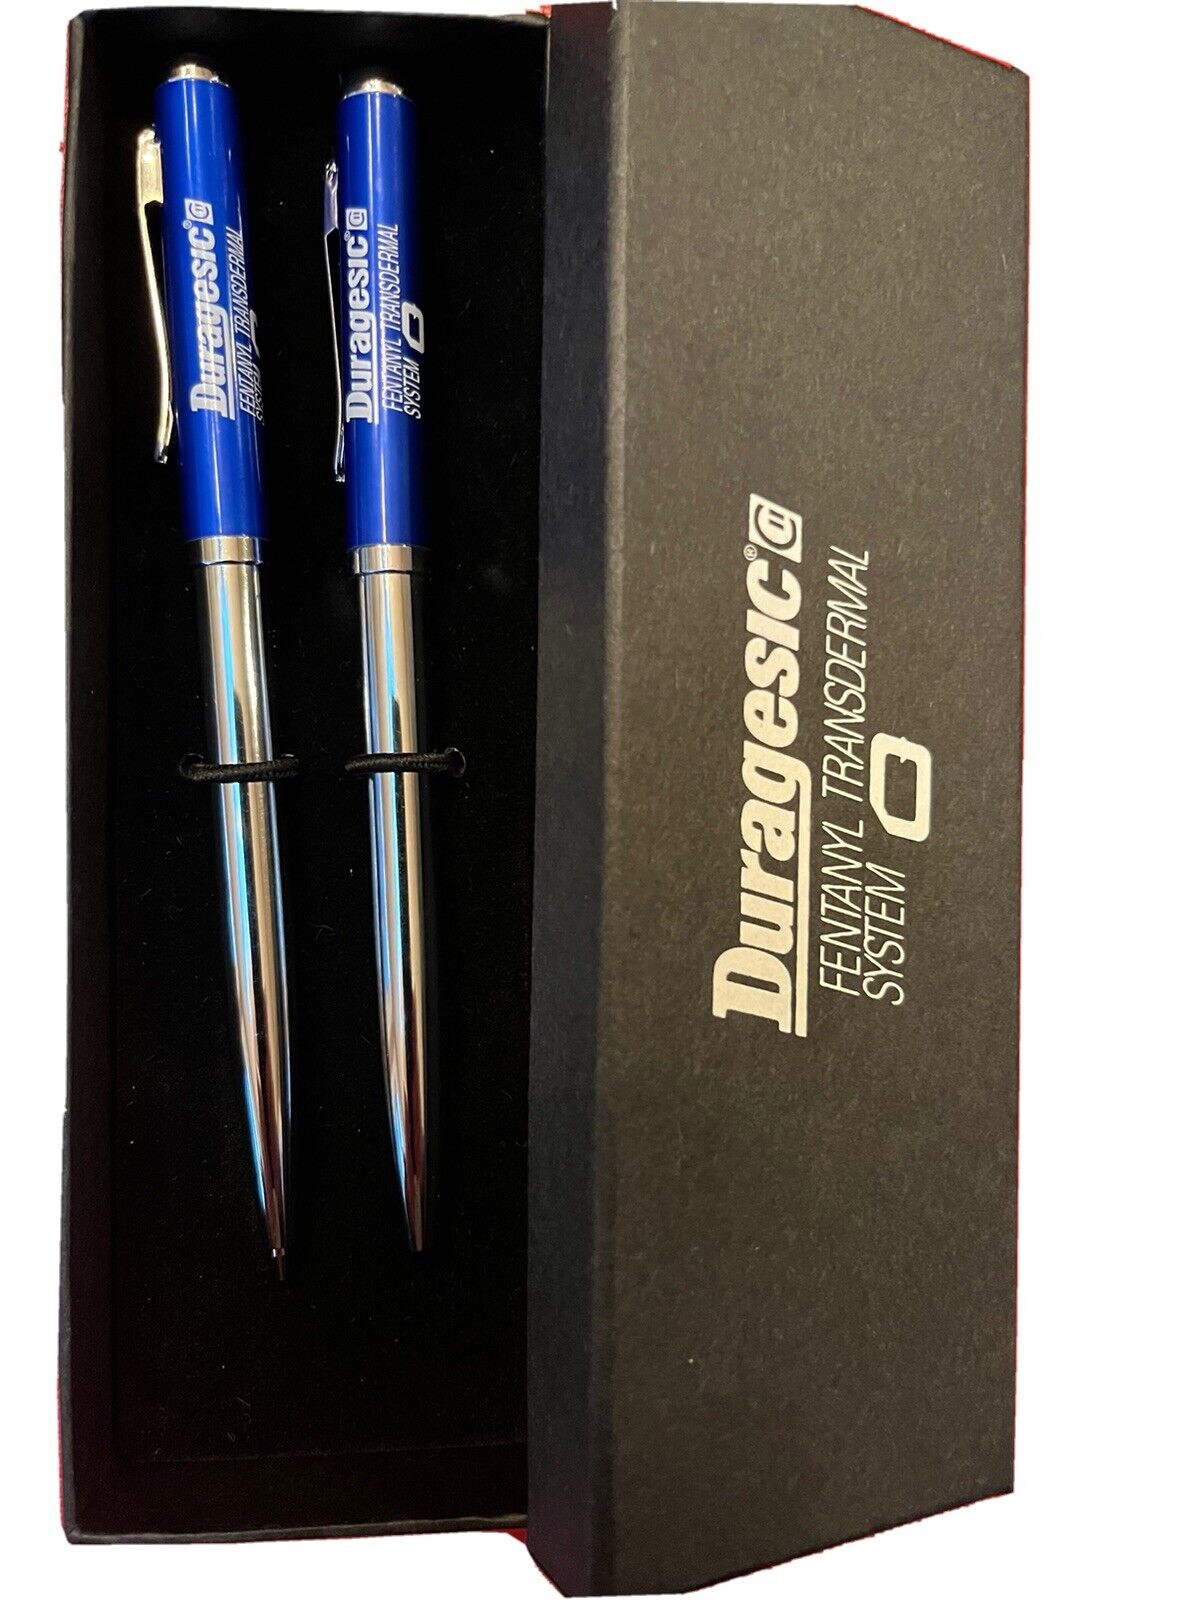 Duragesic (FENTANYL) Pen and Mechanical Pencil Set Class 2 Narcotic NEW Metal 